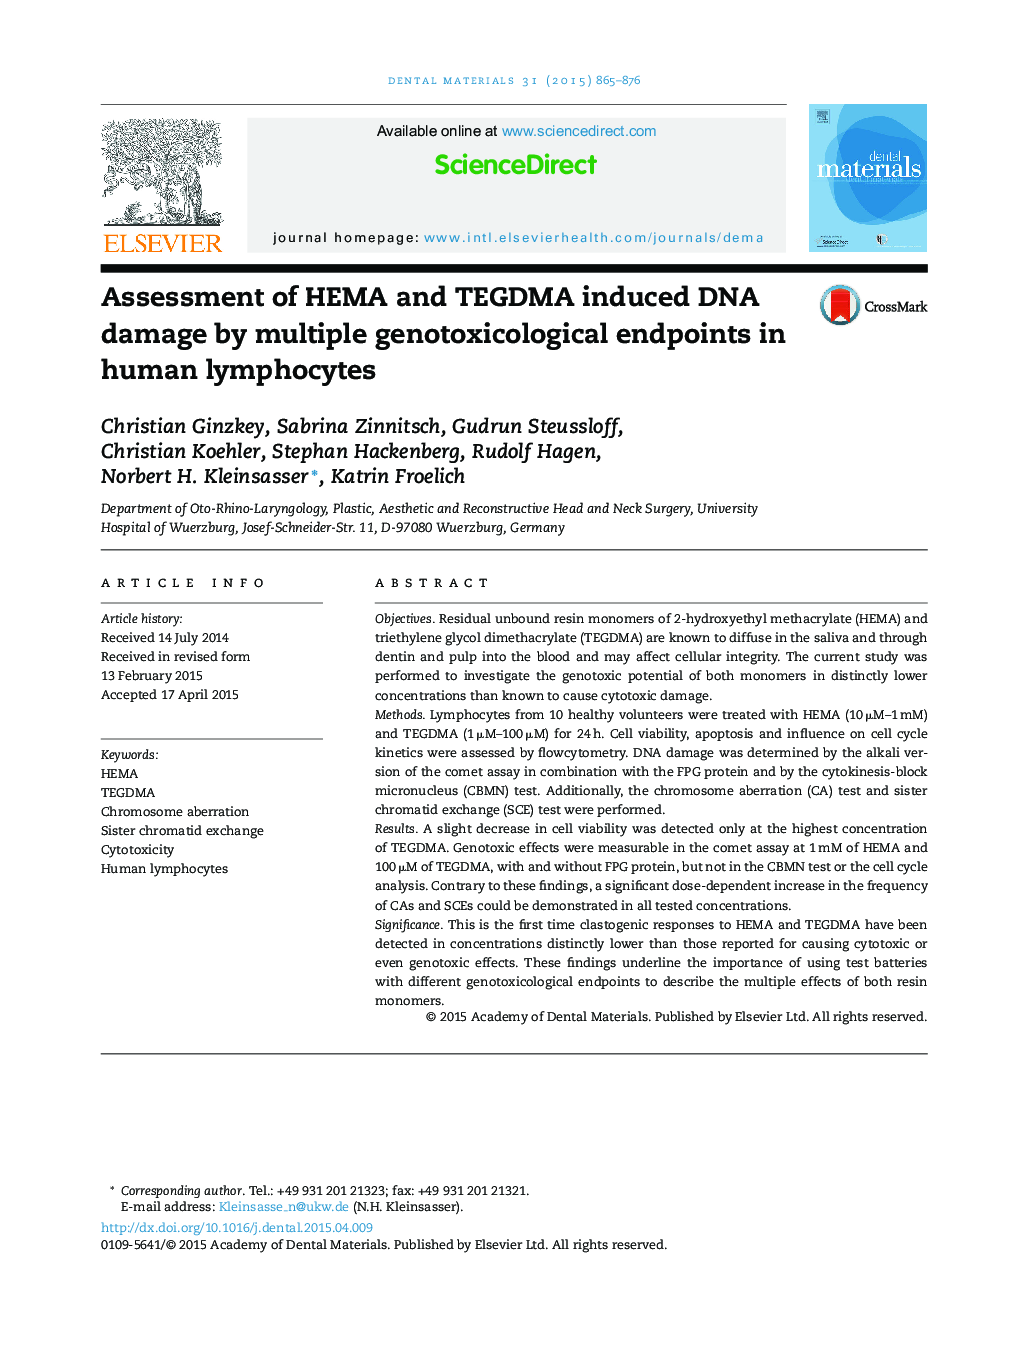 Assessment of HEMA and TEGDMA induced DNA damage by multiple genotoxicological endpoints in human lymphocytes